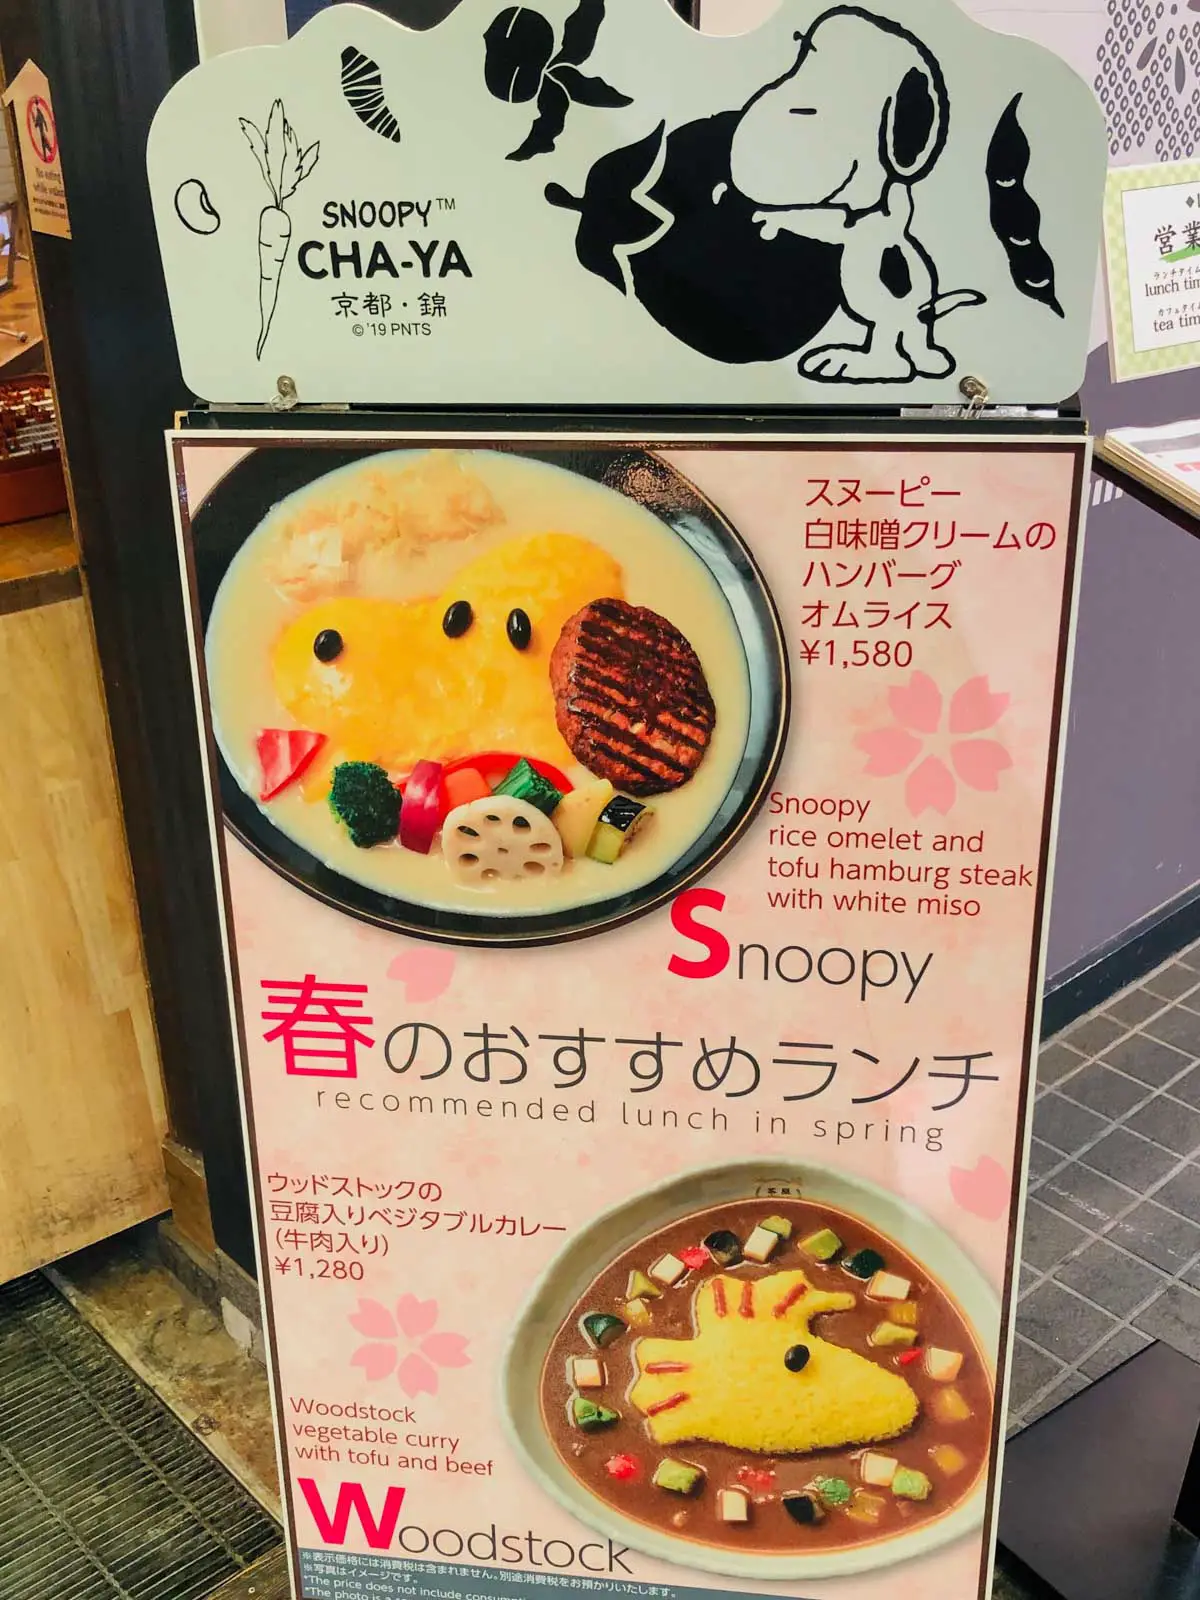 A sign for Snoopy Cha-Ya Restaurant with pictures of a snoopy rice omelet and a Woodstock curry.